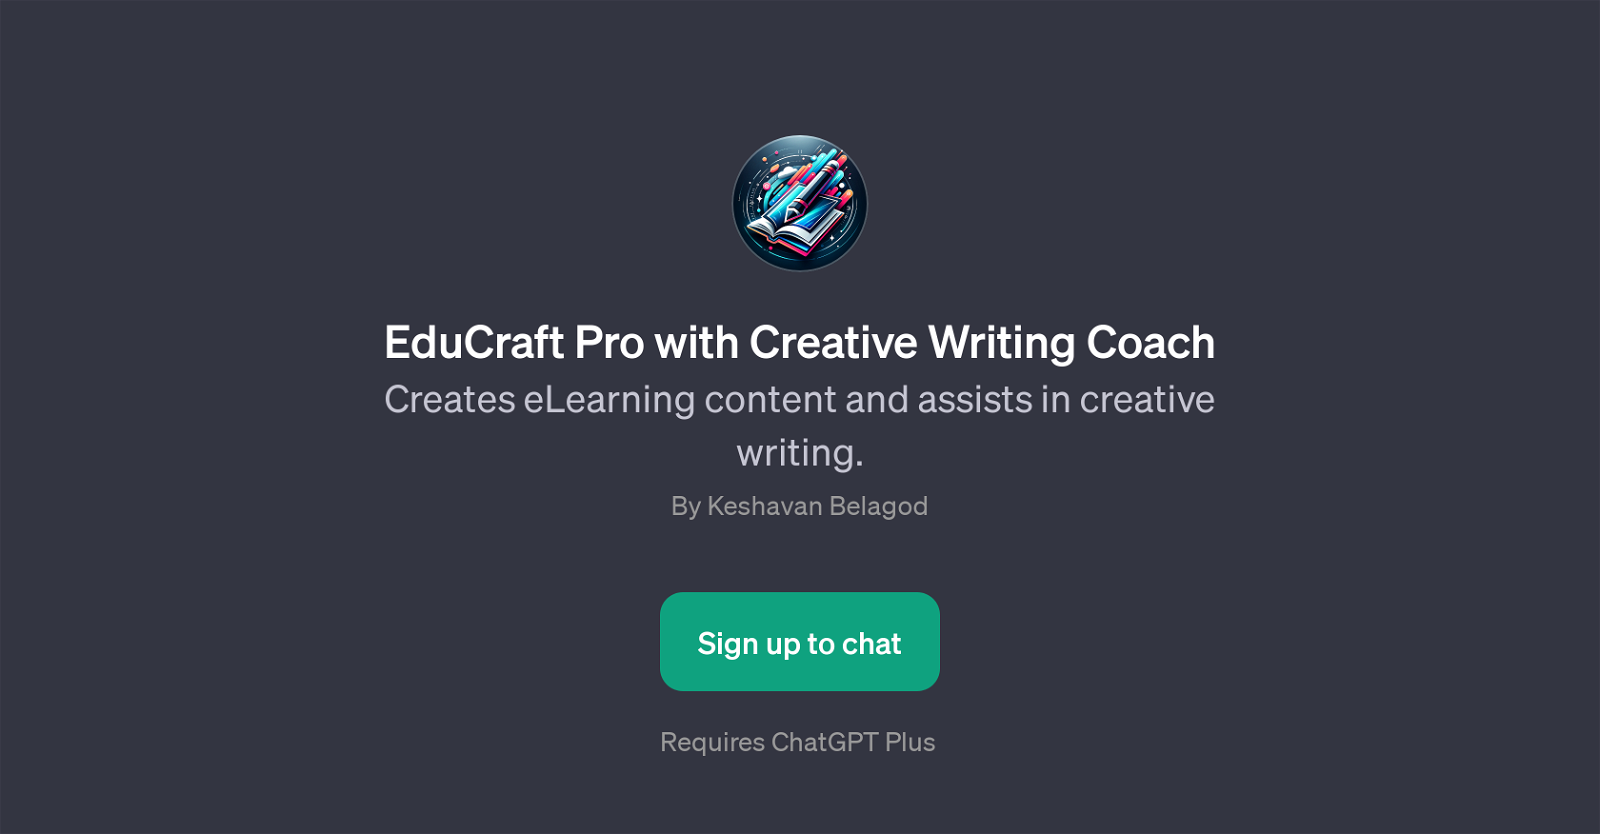 EduCraft Pro with Creative Writing Coach website